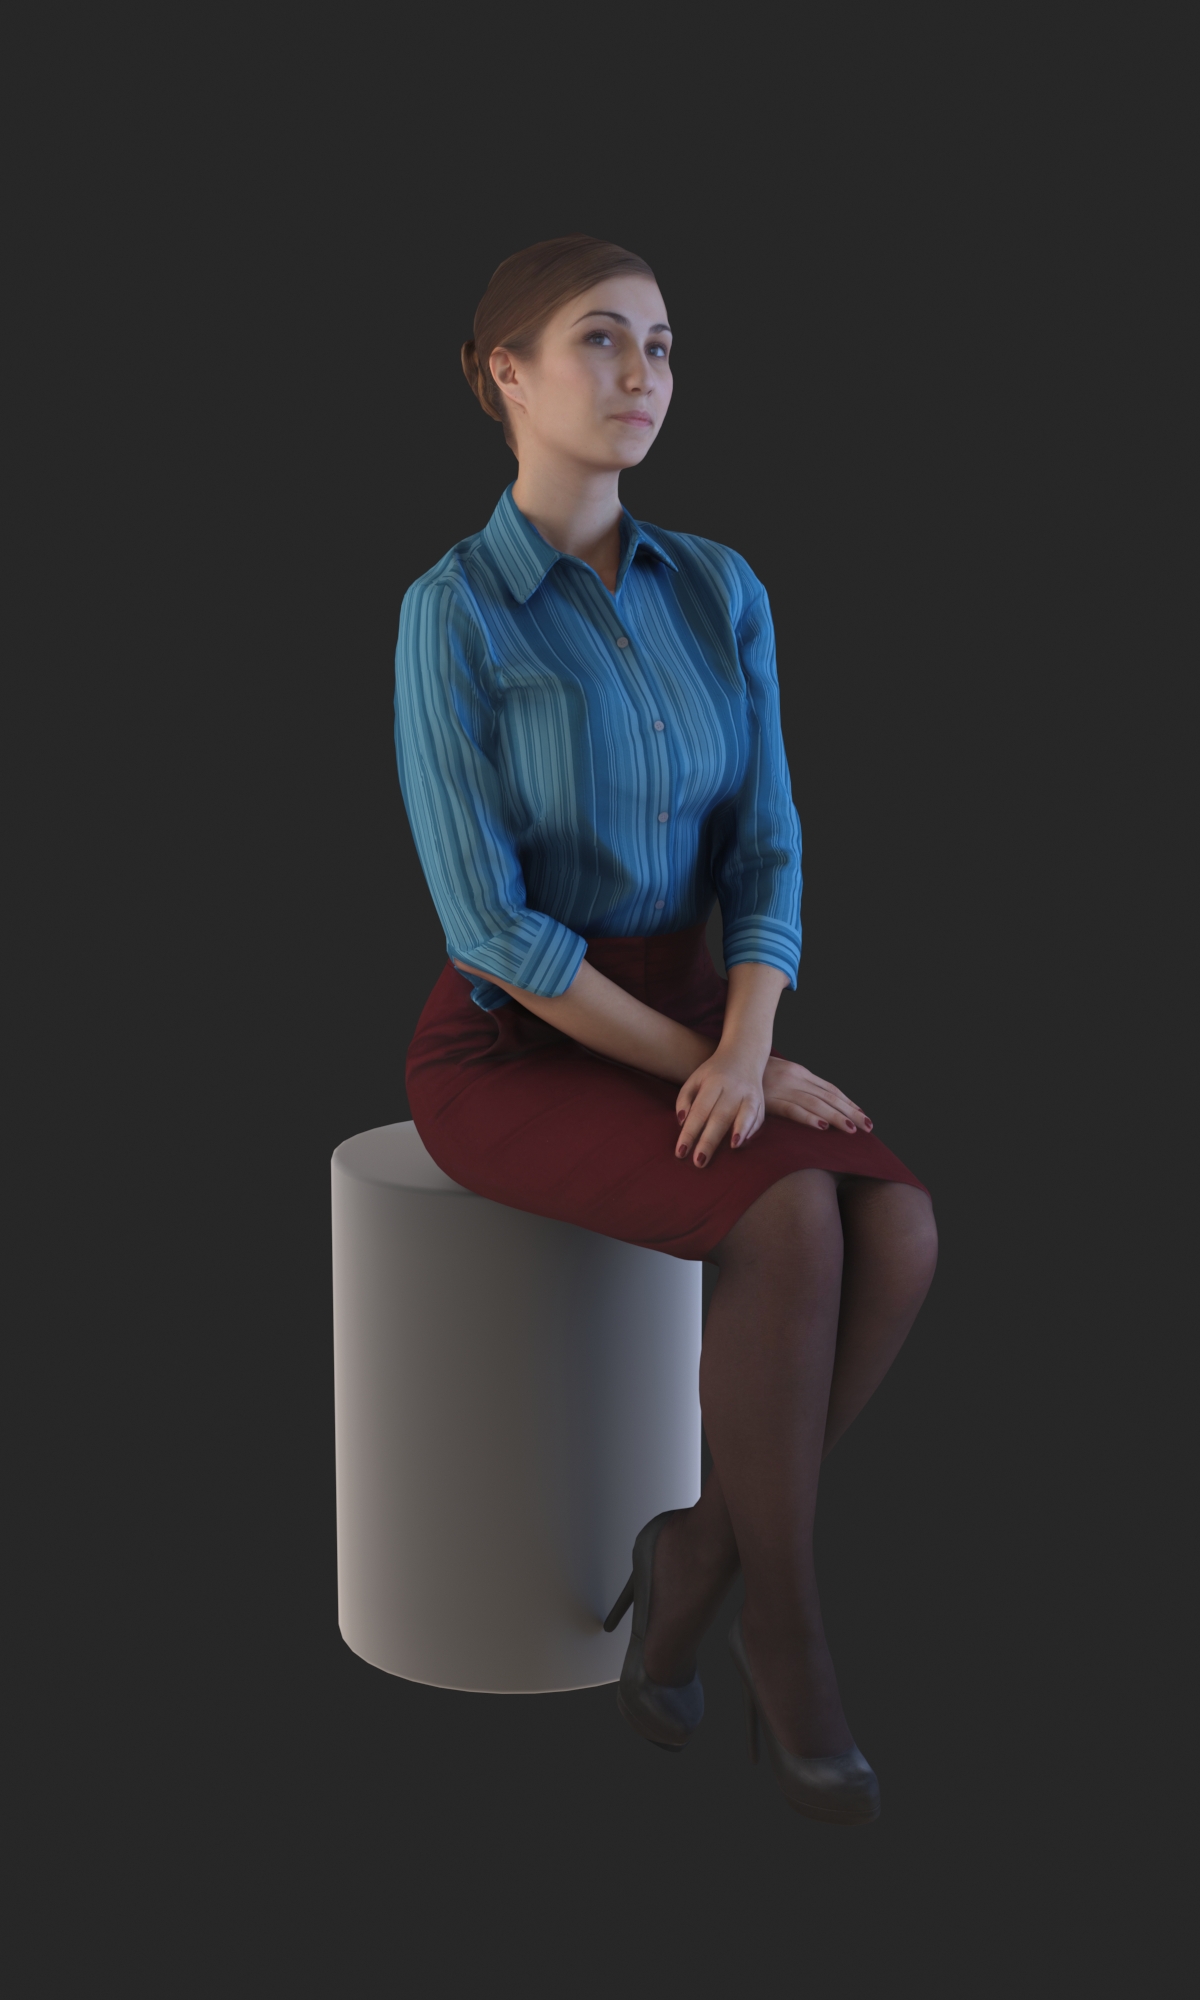 3DSKY FREE – HUMAN 3D – POSED PEOPLE – No.013